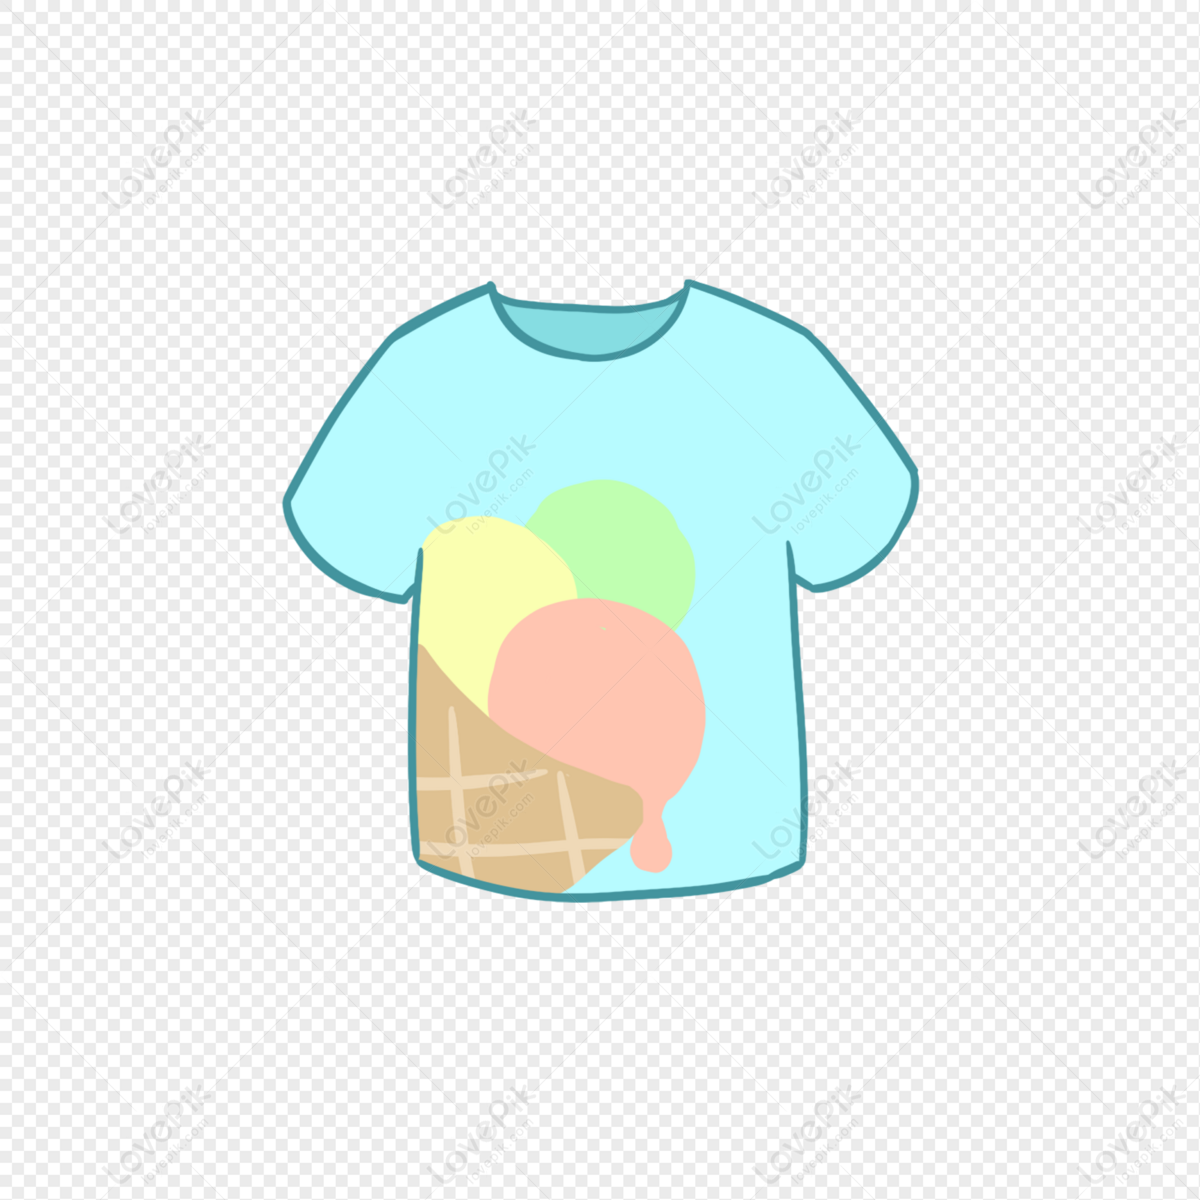 Short Sleeve PNG Image Free Download And Clipart Image For Free ...